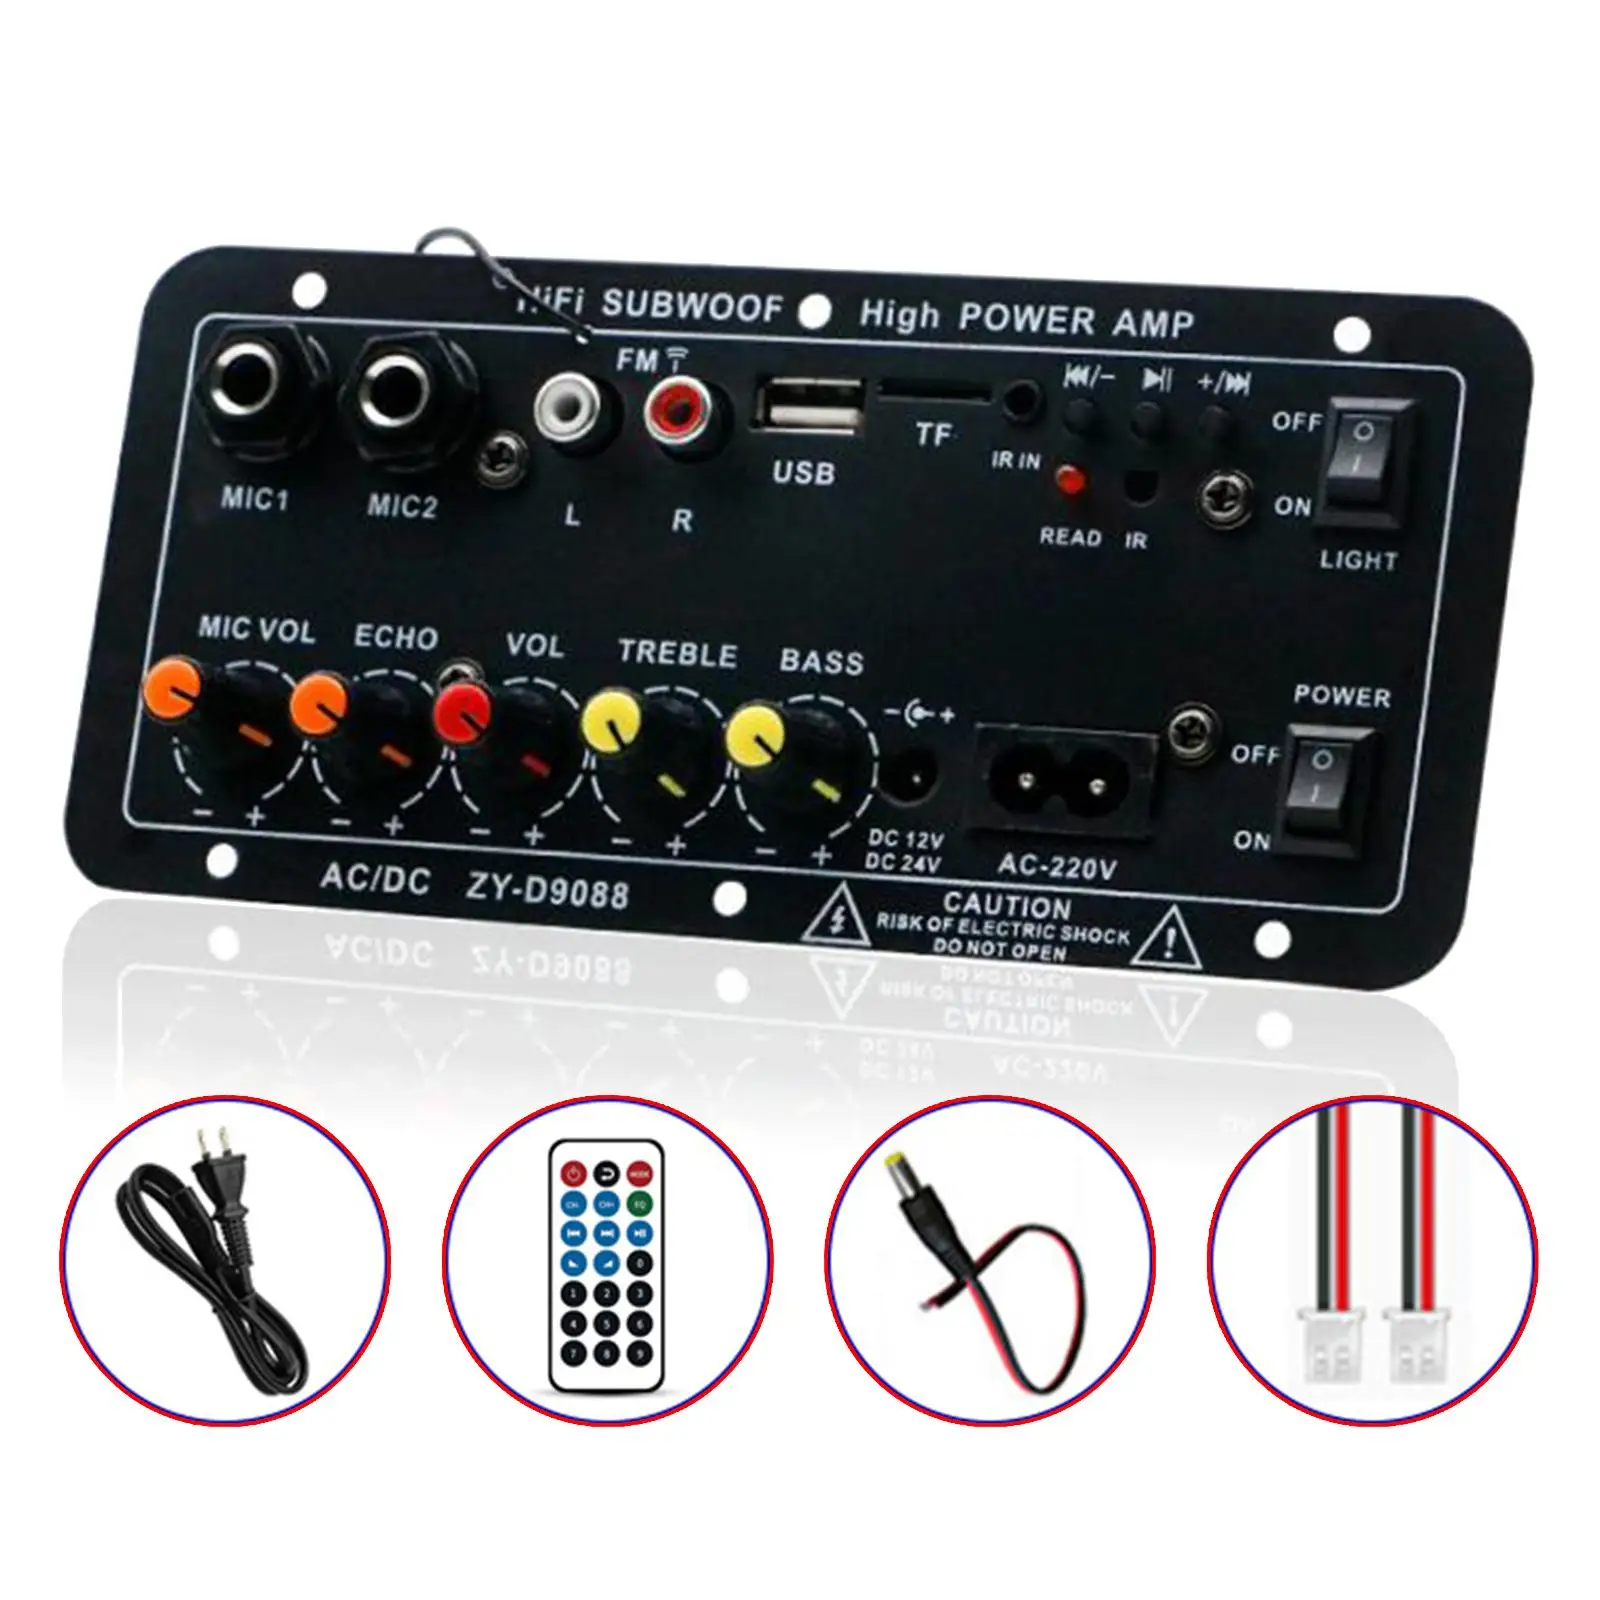 Amplifier Board with Remote Control High Power Stereo Subwoofer Amplifier for Home Store Theater Speakers US